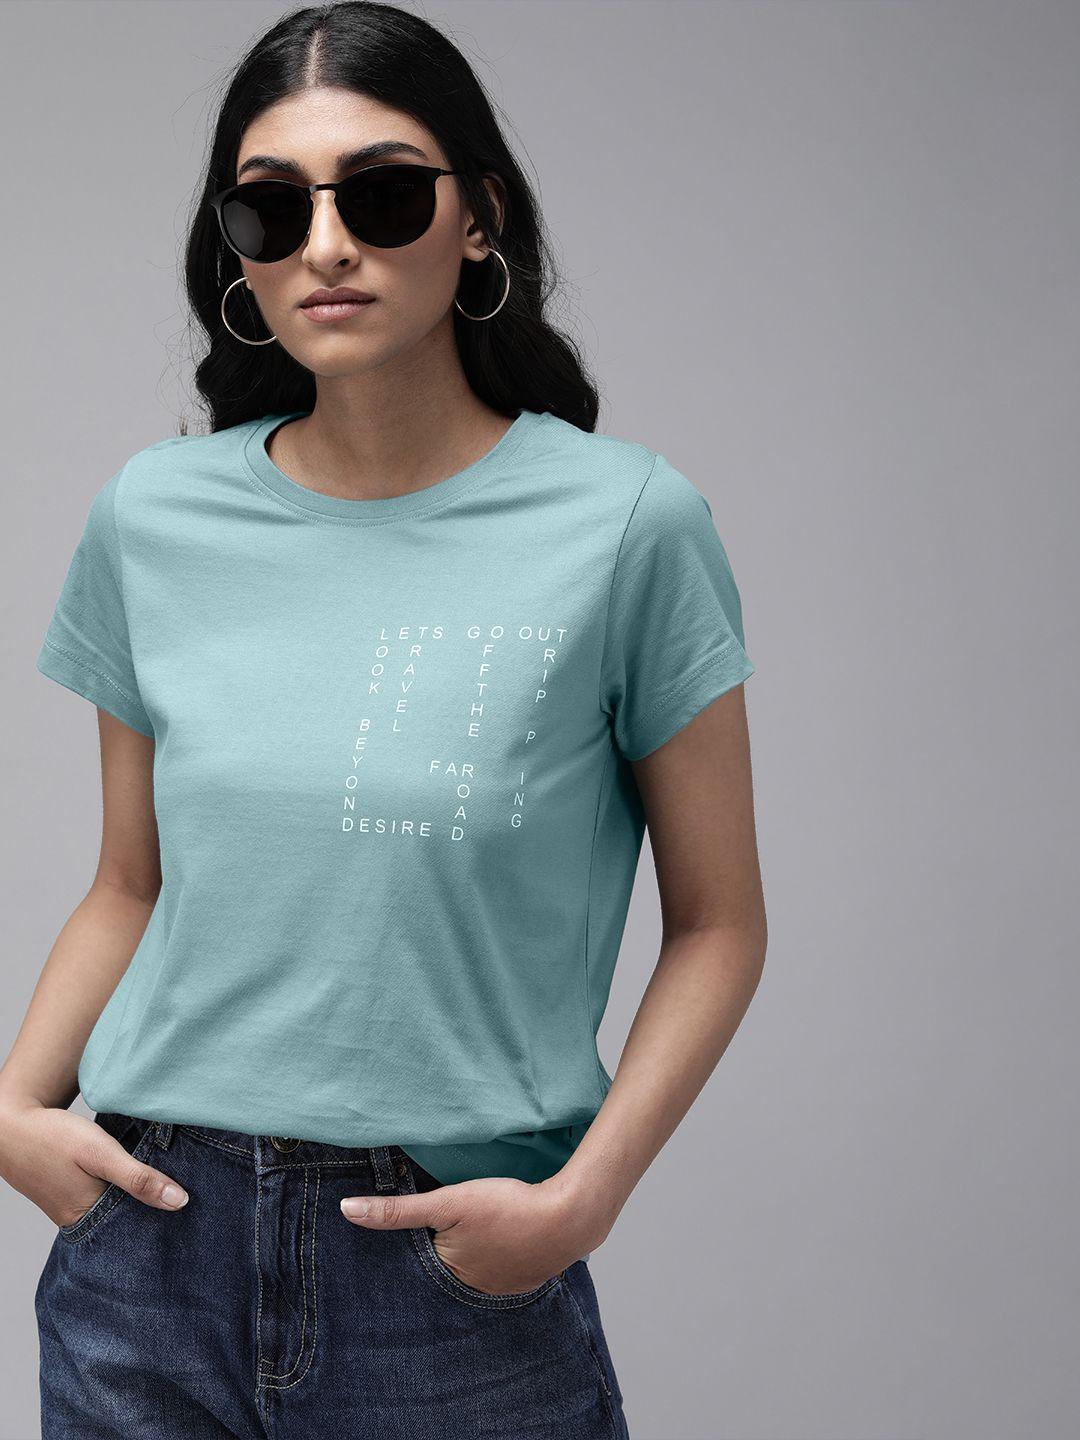 the roadster lifestyle co women green & white printed extended sleeves t-shirt